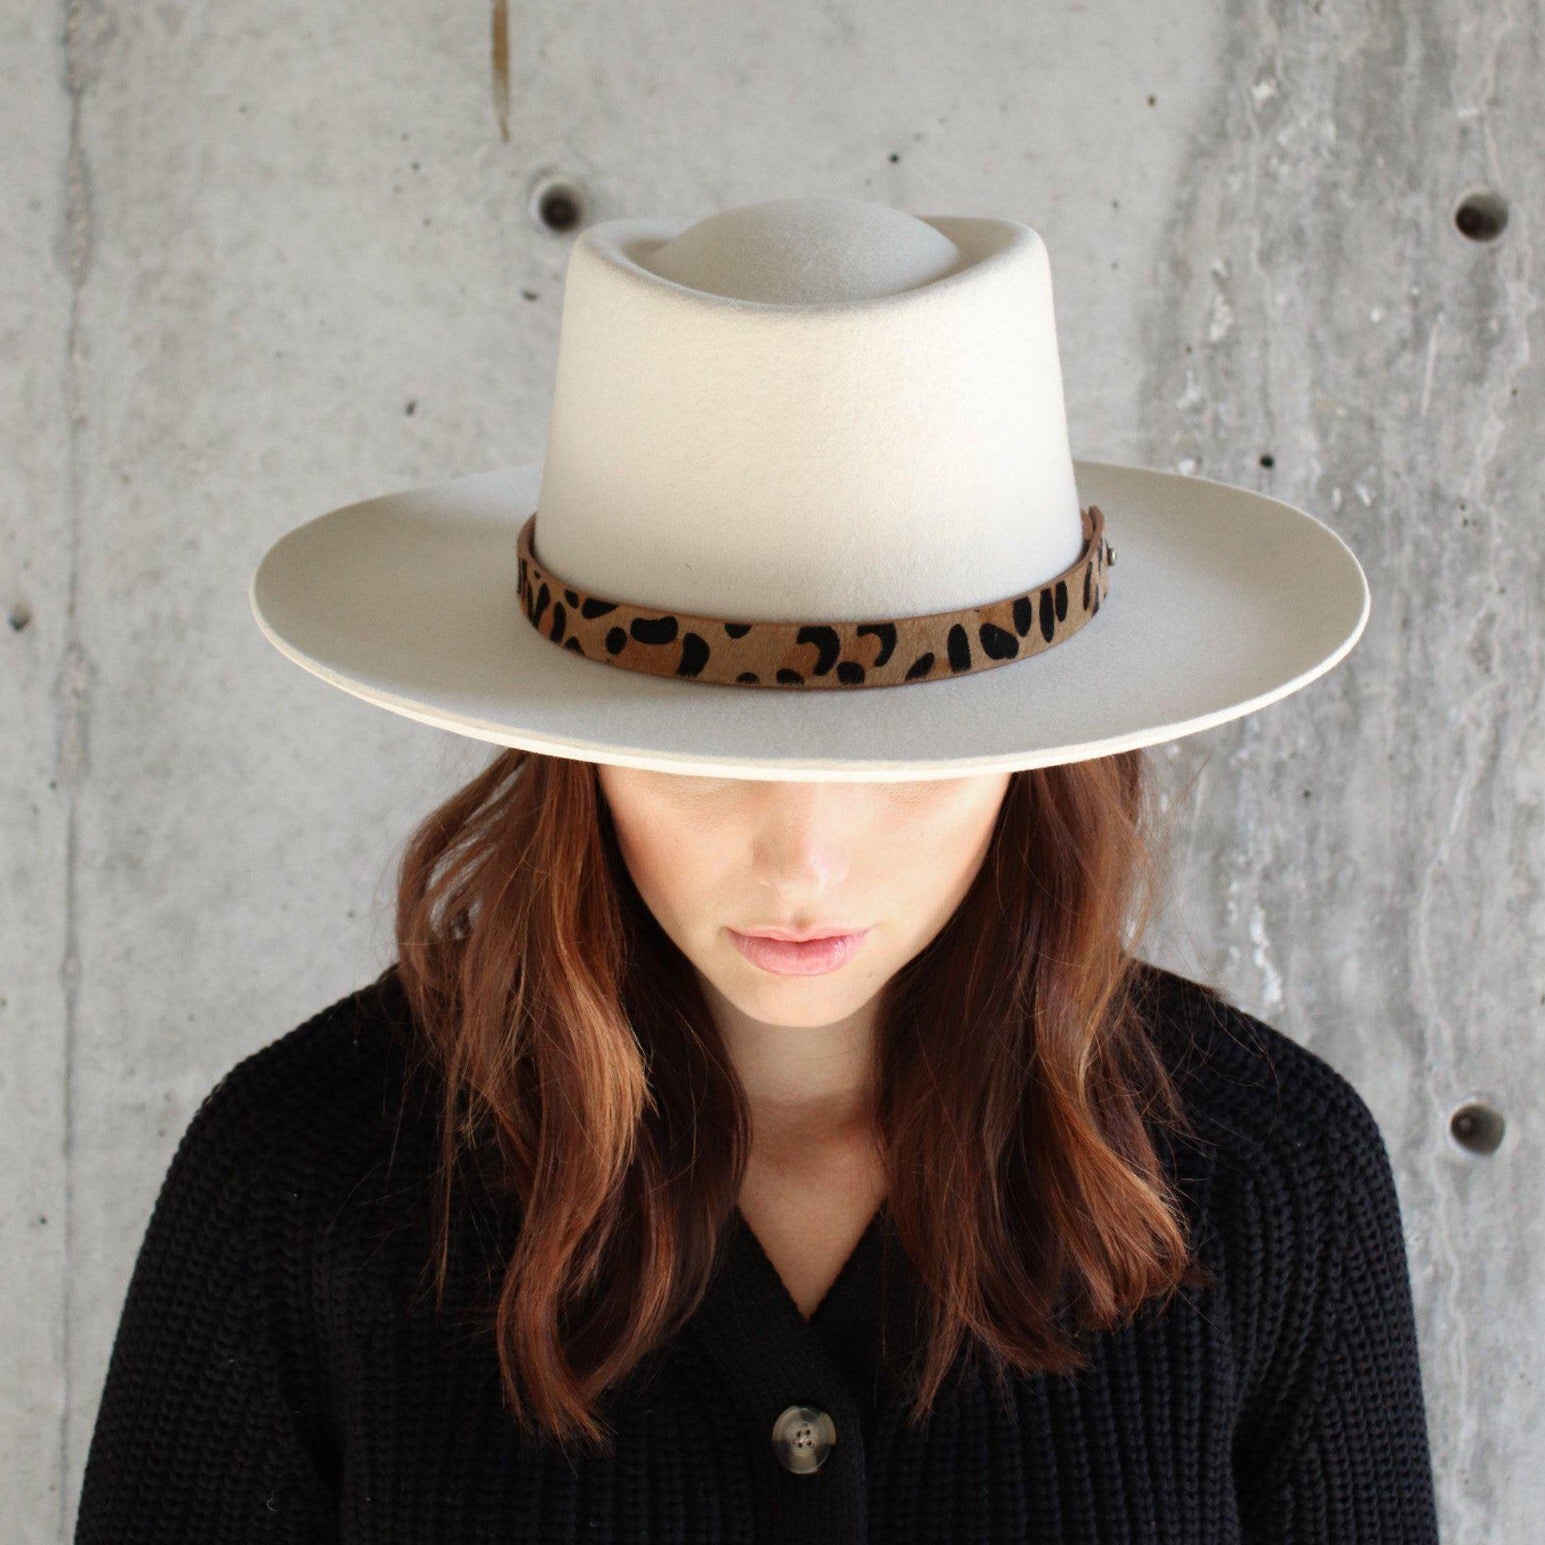 Gigi Pip hat bands + trims for women's hats - Leopard Print Band - 100% genuine leather band with a layer of leopard print faux fur lining the outside and a brass pin to secure around the back of your crown [tan]